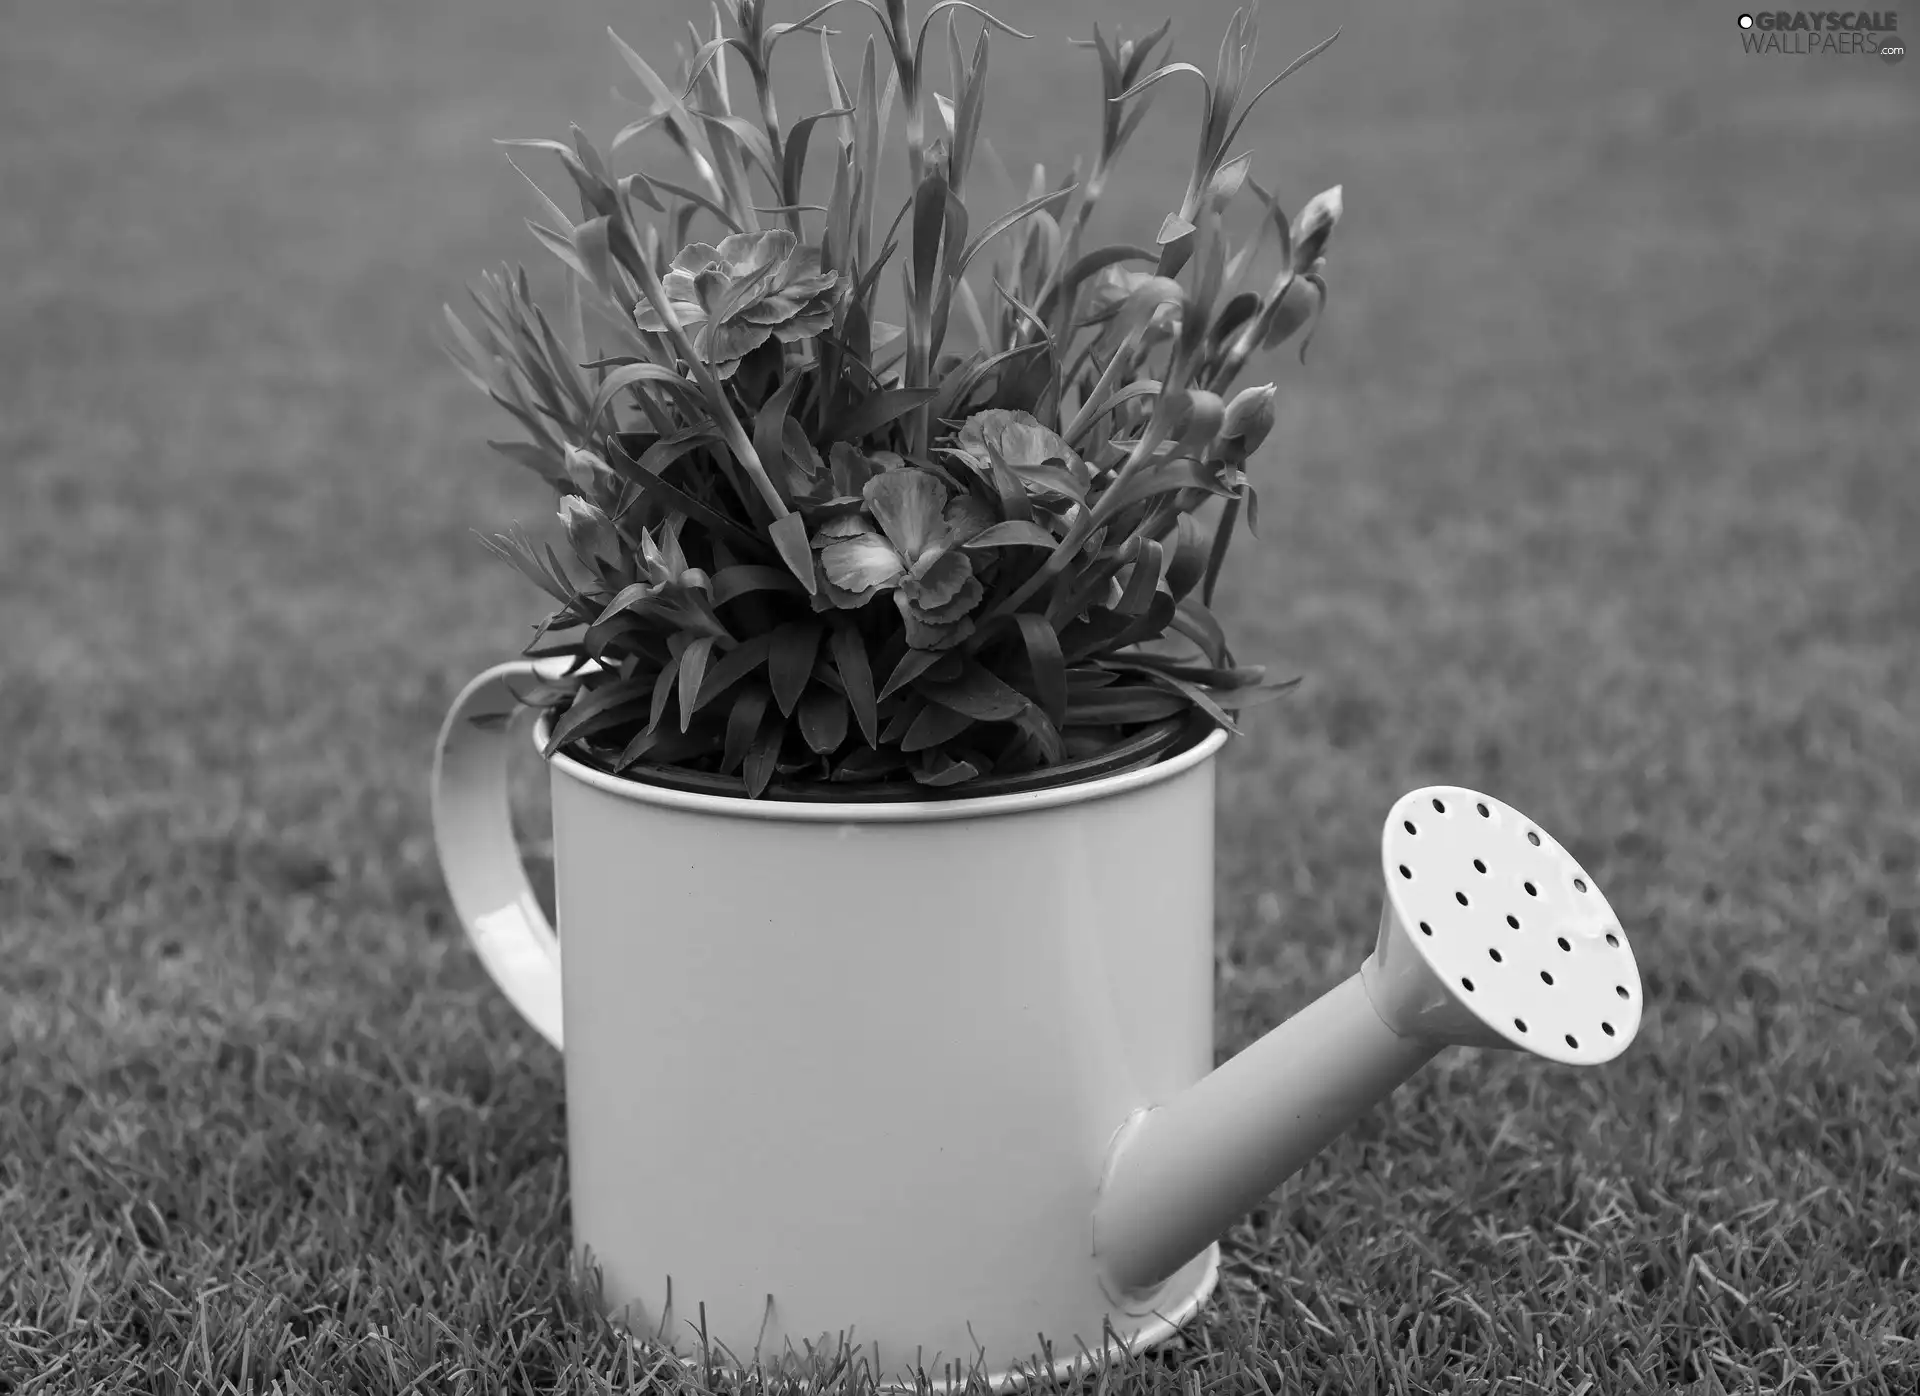 Yellow Honda, Flowers, grass, blurry background, watering can, cloves